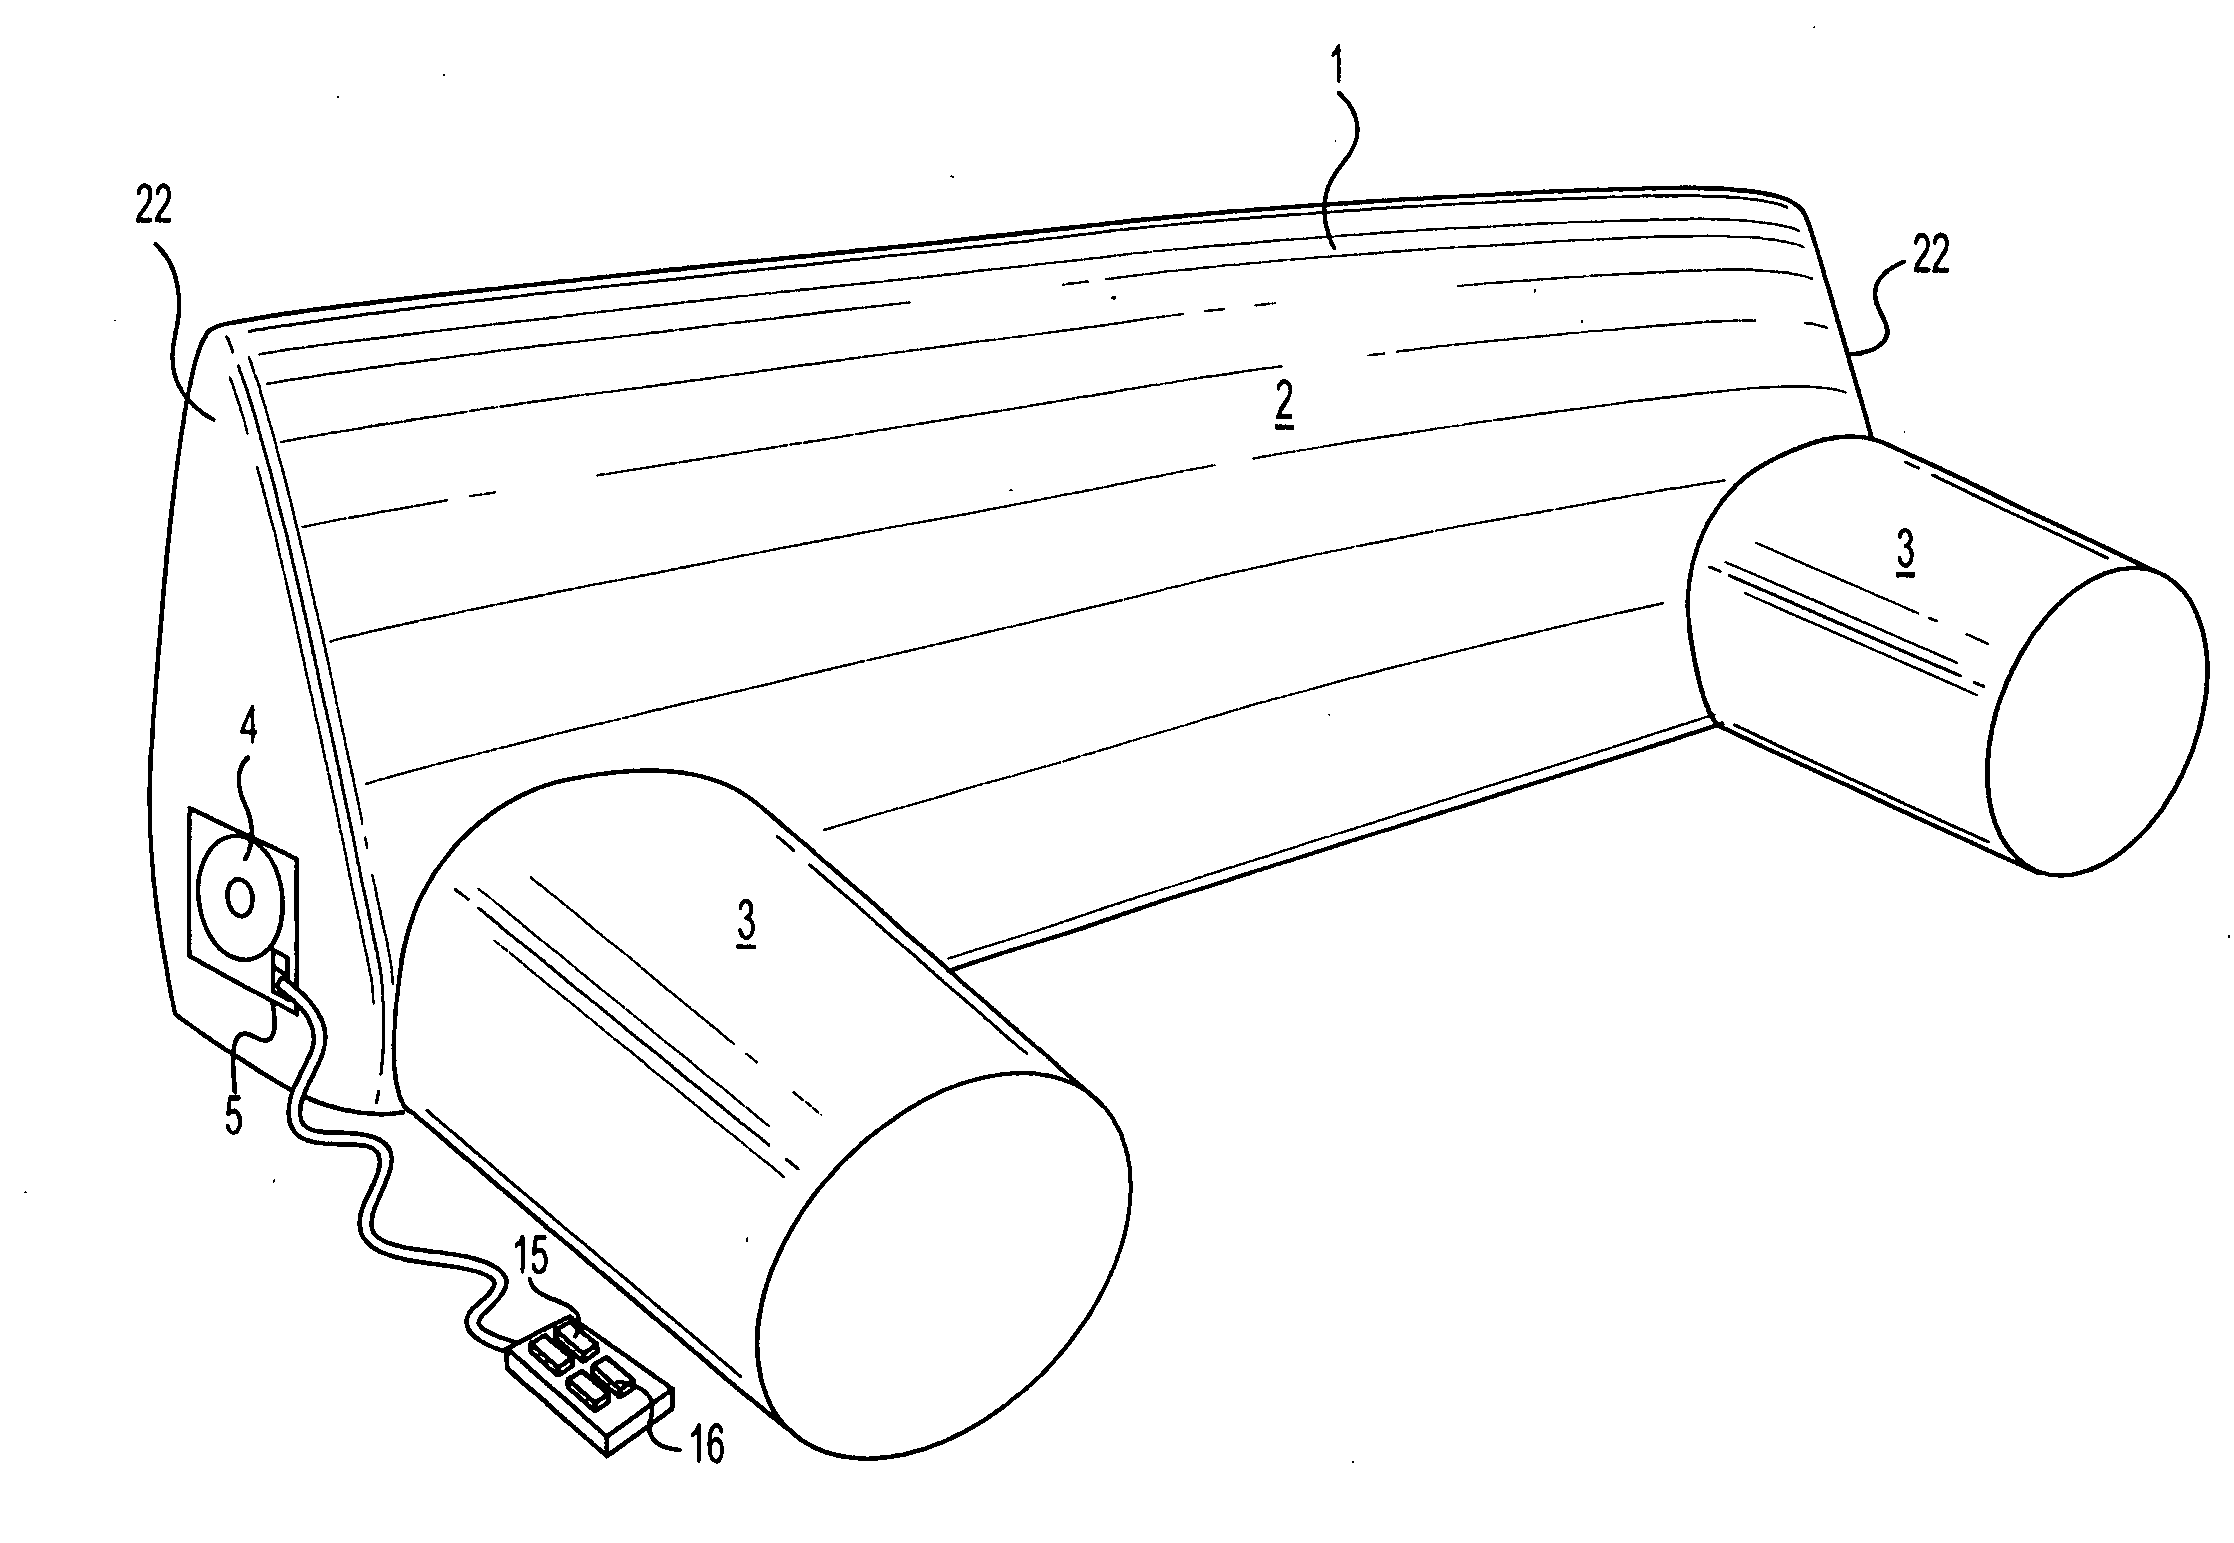 Inflatable cushion for turning a bed into a sofa